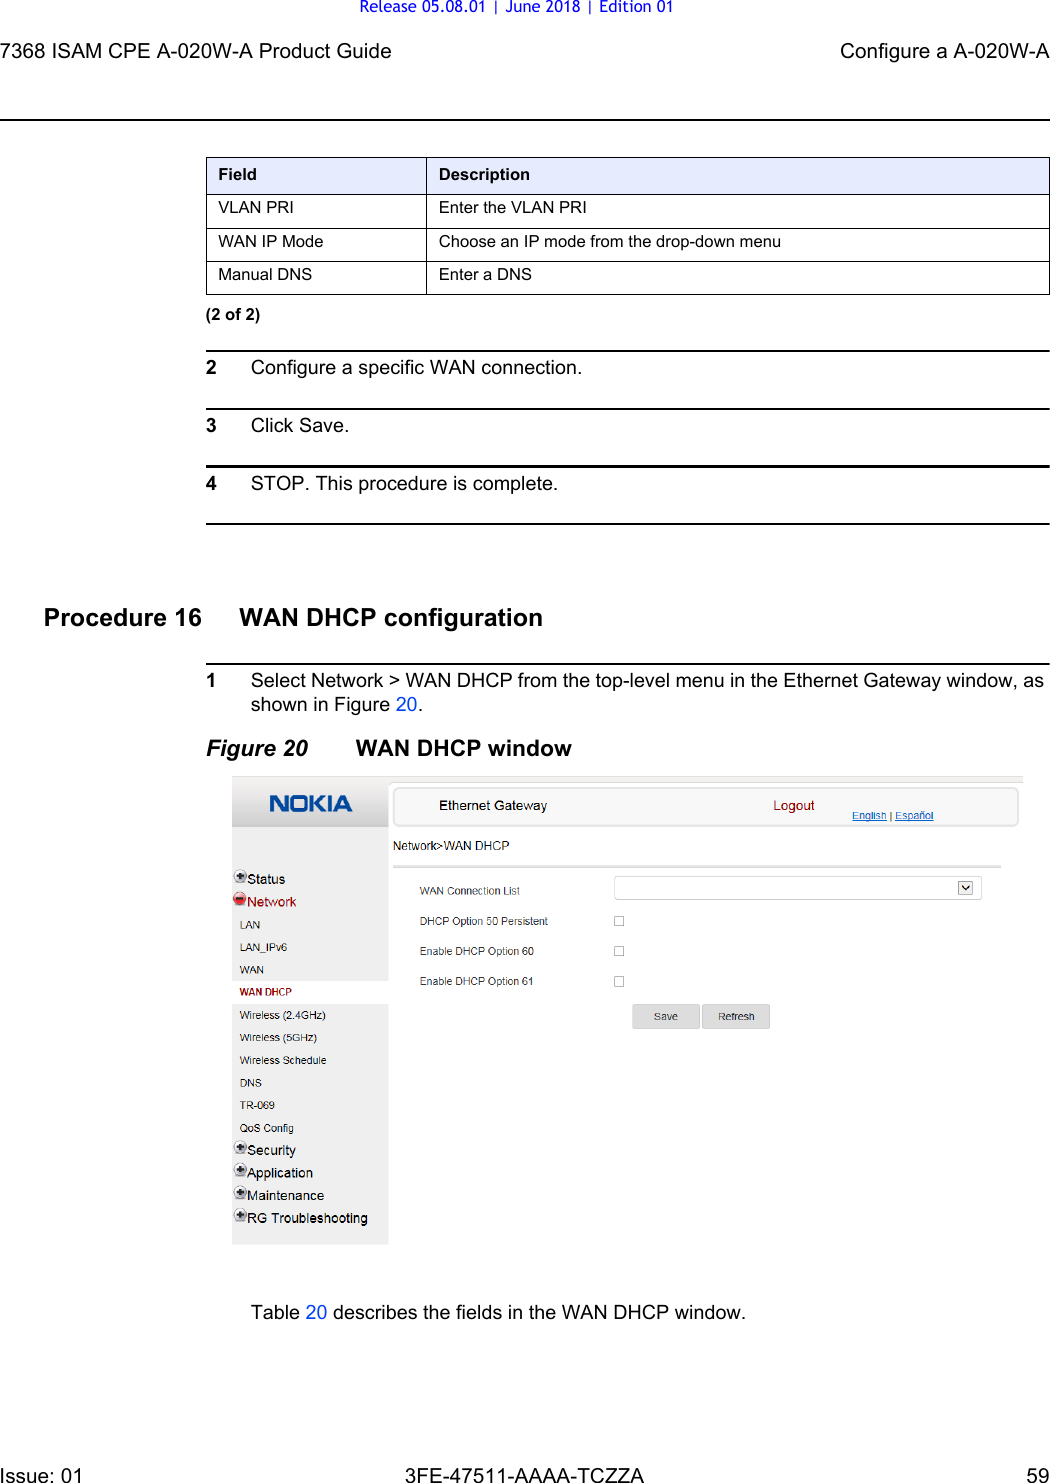 7368 ISAM CPE A-020W-A Product Guide Configure a A-020W-AIssue: 01 3FE-47511-AAAA-TCZZA 59 2Configure a specific WAN connection.3Click Save.4STOP. This procedure is complete.Procedure 16 WAN DHCP configuration1Select Network &gt; WAN DHCP from the top-level menu in the Ethernet Gateway window, as shown in Figure 20.Figure 20 WAN DHCP windowTable 20 describes the fields in the WAN DHCP window.VLAN PRI Enter the VLAN PRIWAN IP Mode Choose an IP mode from the drop-down menuManual DNS Enter a DNSField Description(2 of 2)Release 05.08.01 | June 2018 | Edition 01